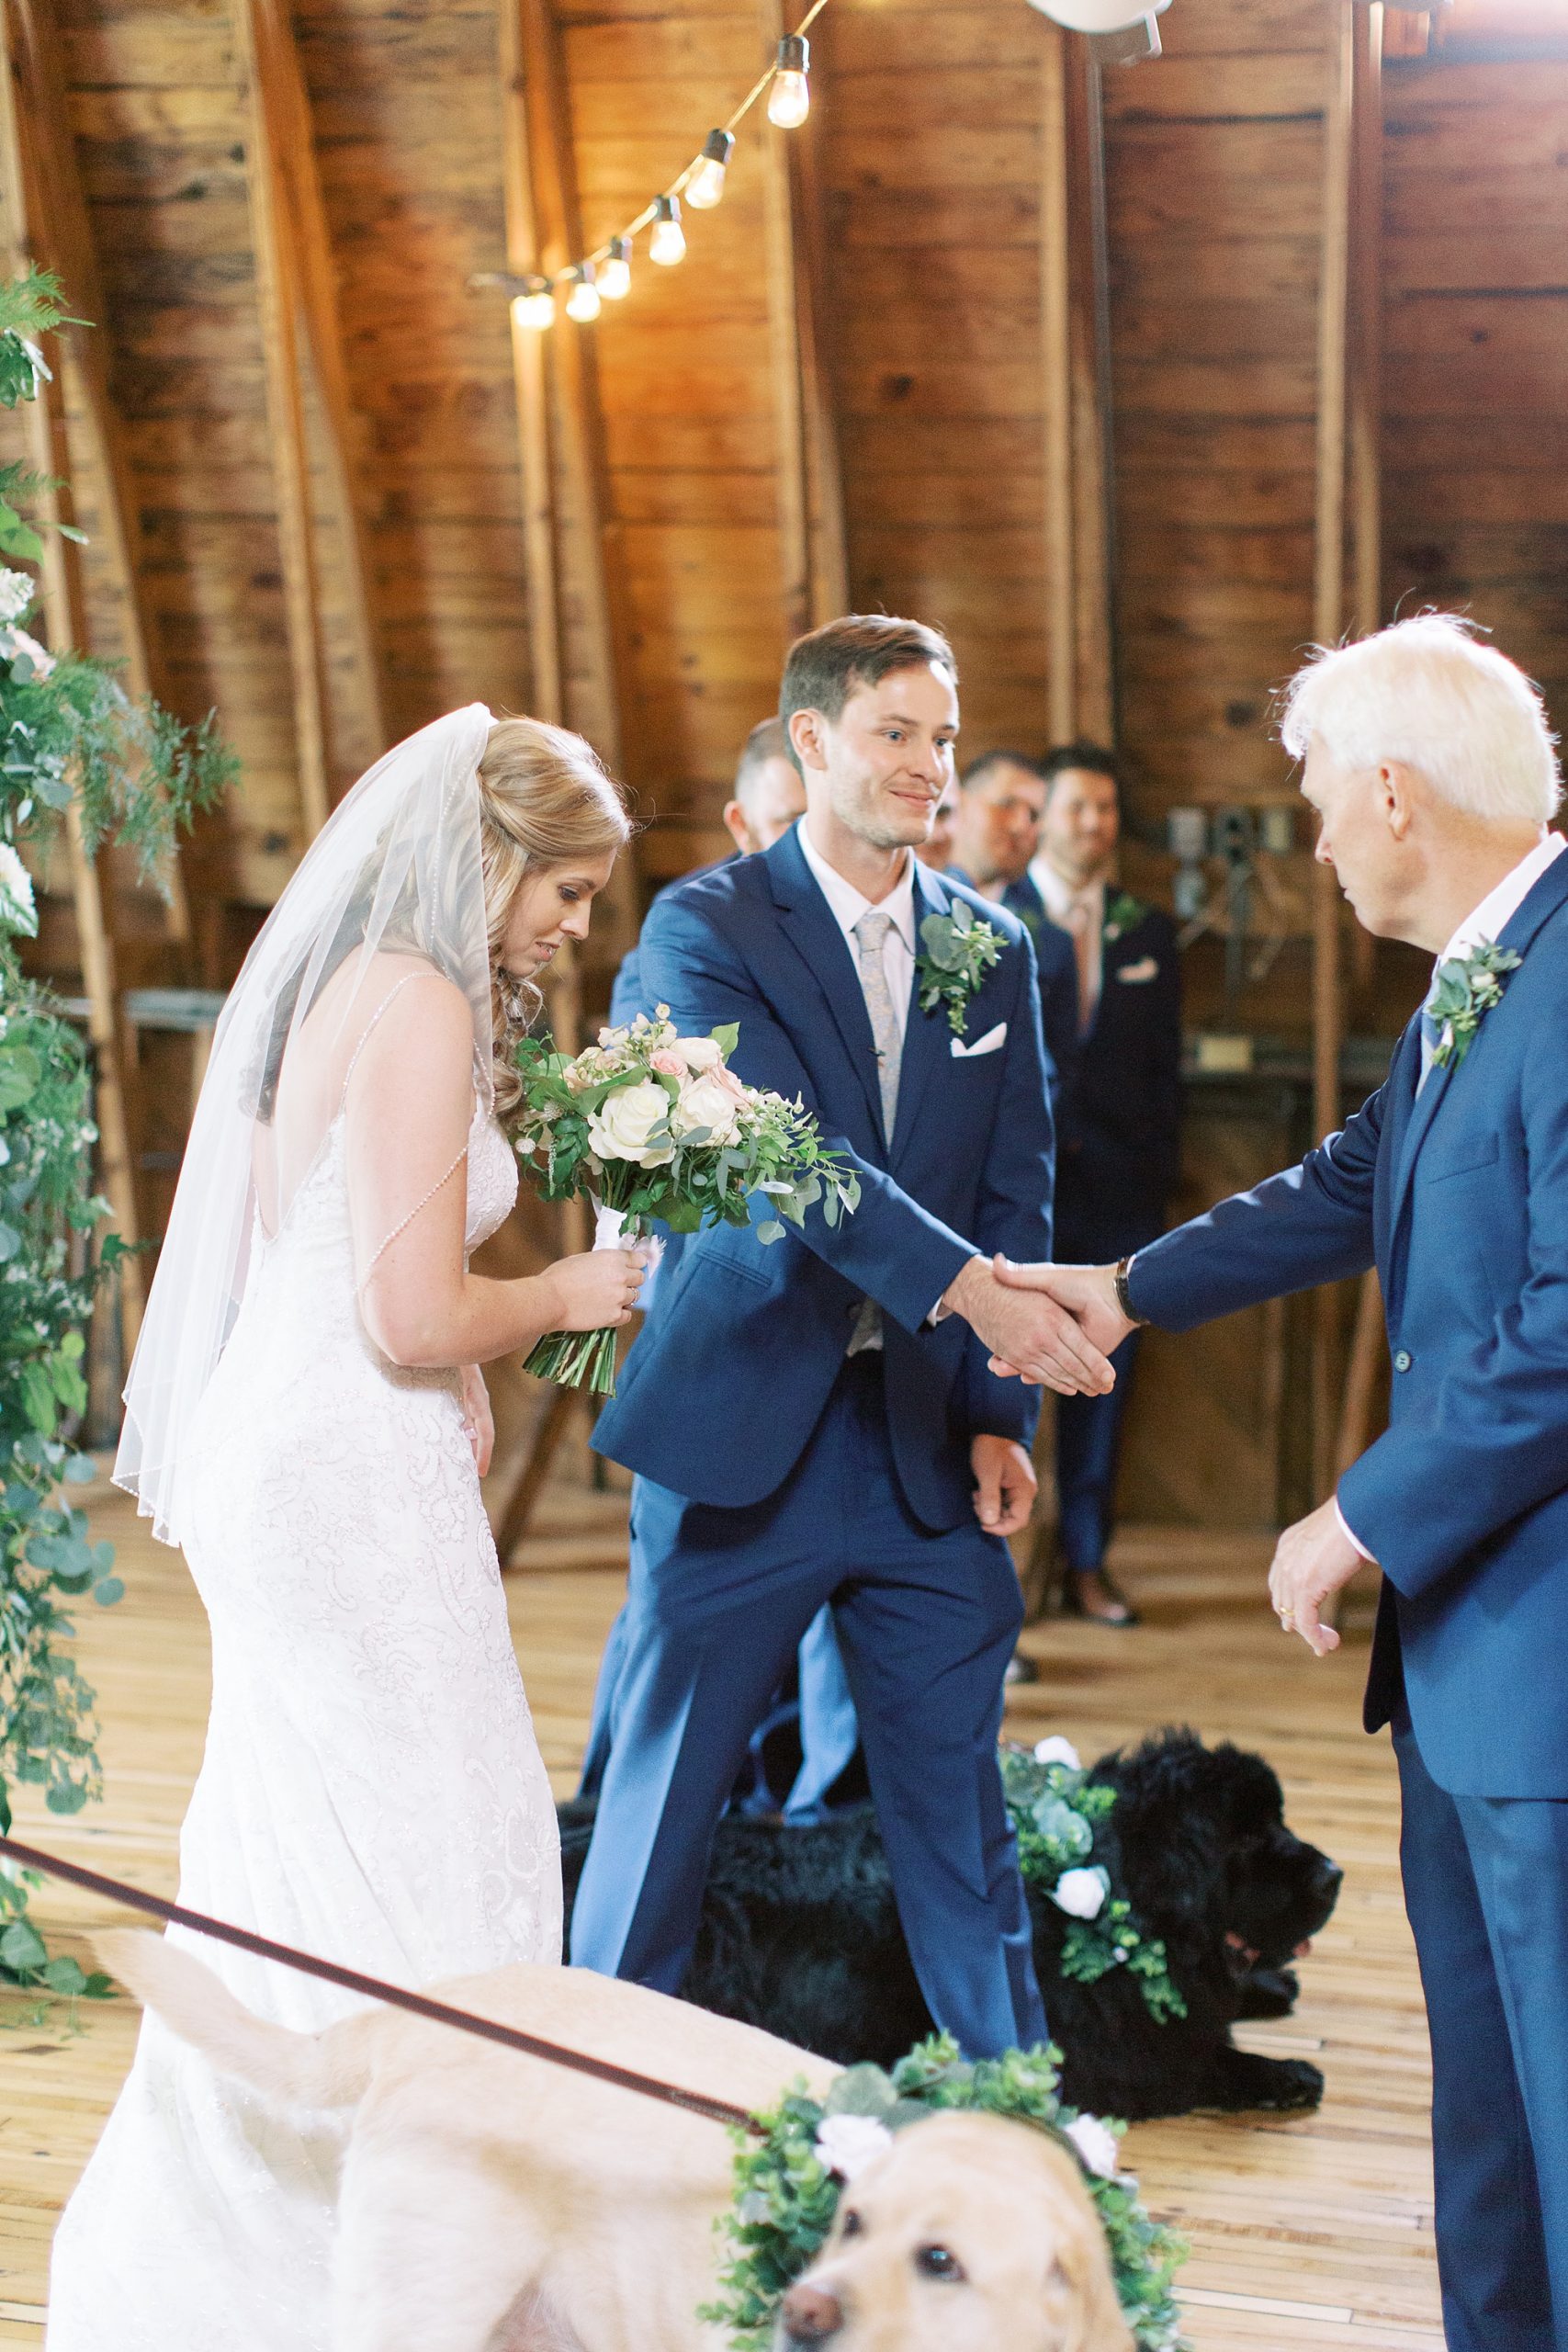 father shakes hand with groom during wedding ceremony